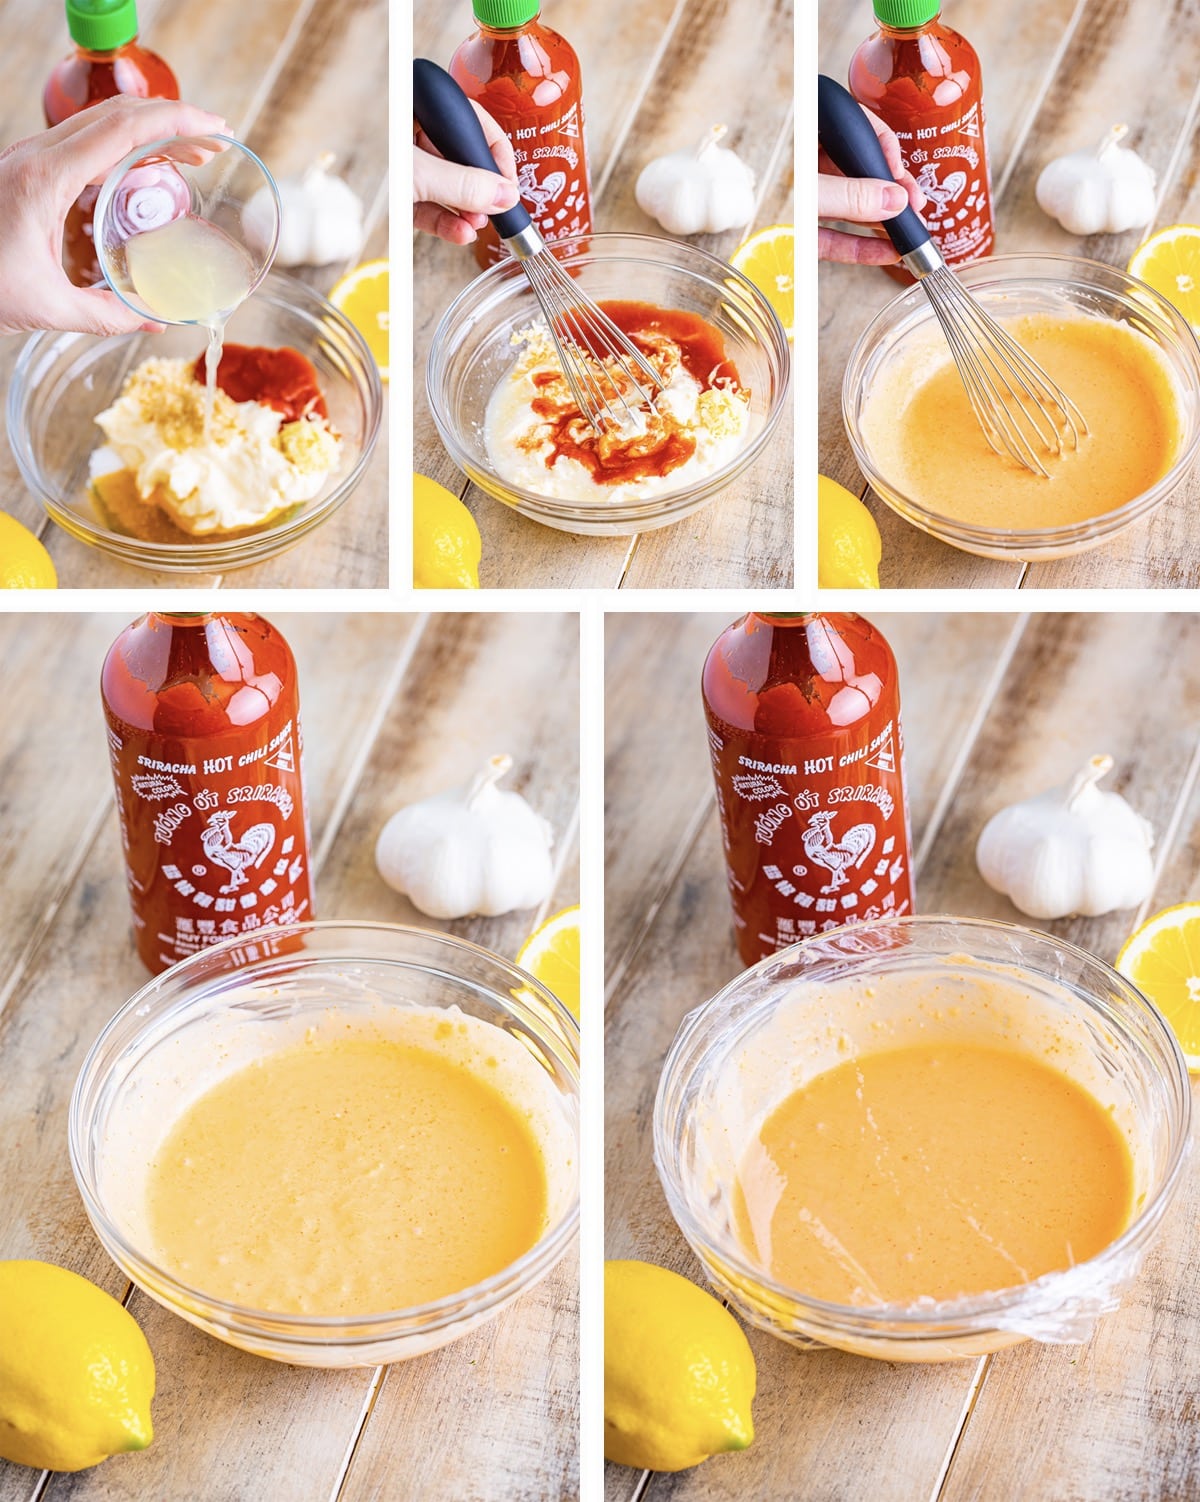 Collage of images showing how to make this sriracha mayo recipe